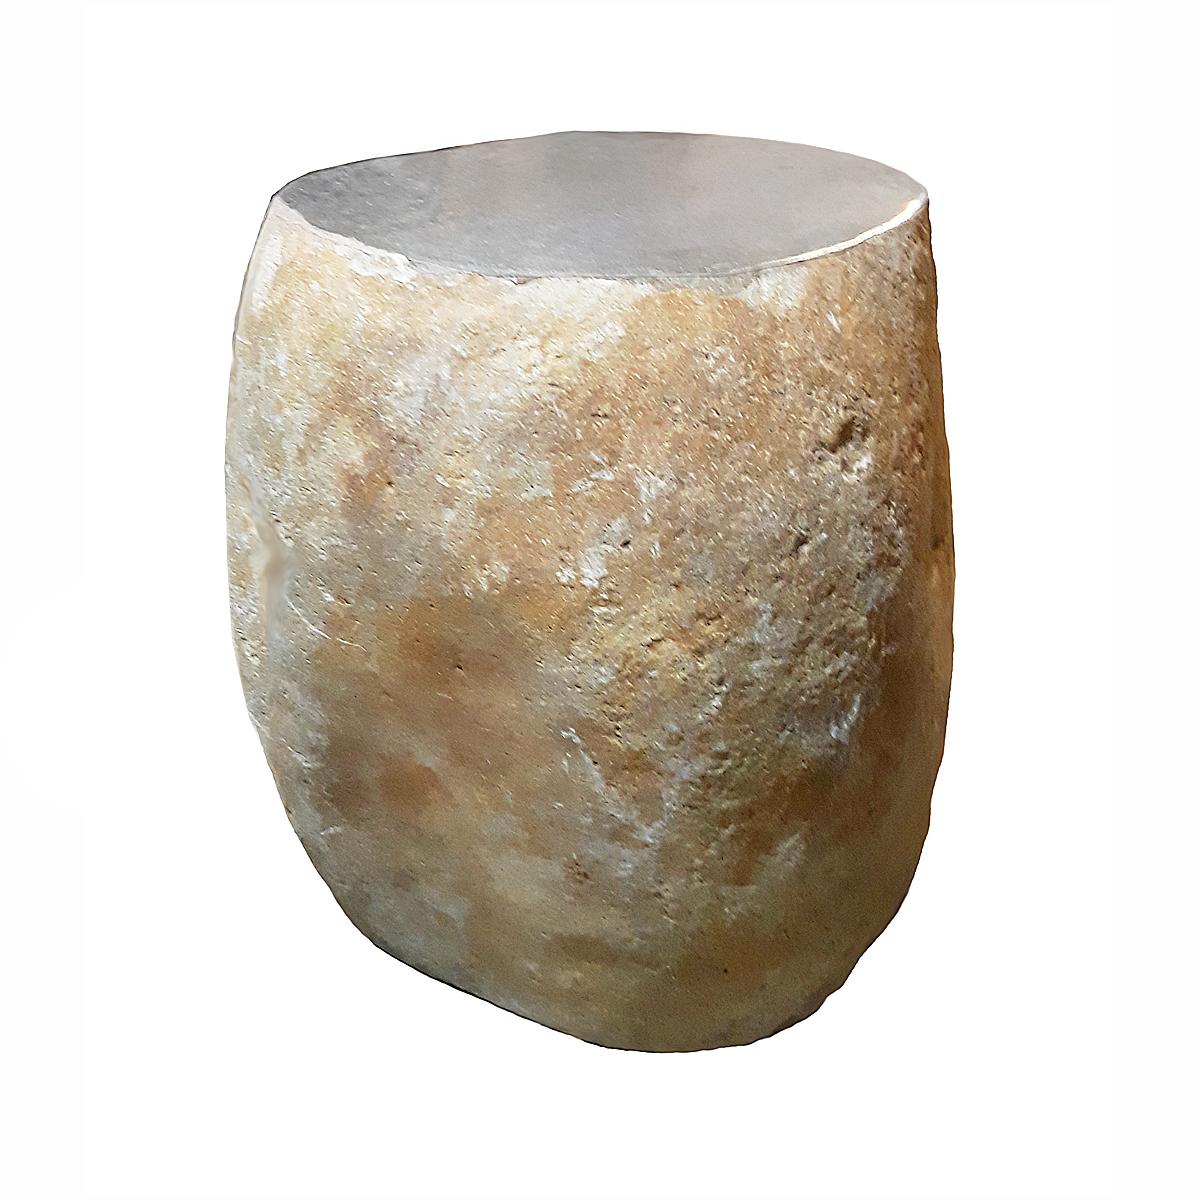 A solid stone end table, stool or stand with textured sides and polished top. From Indonesia, contemporary. Oblong shape. Ideal accent table for an indoor organic decor, as a garden addition, or as a stand.